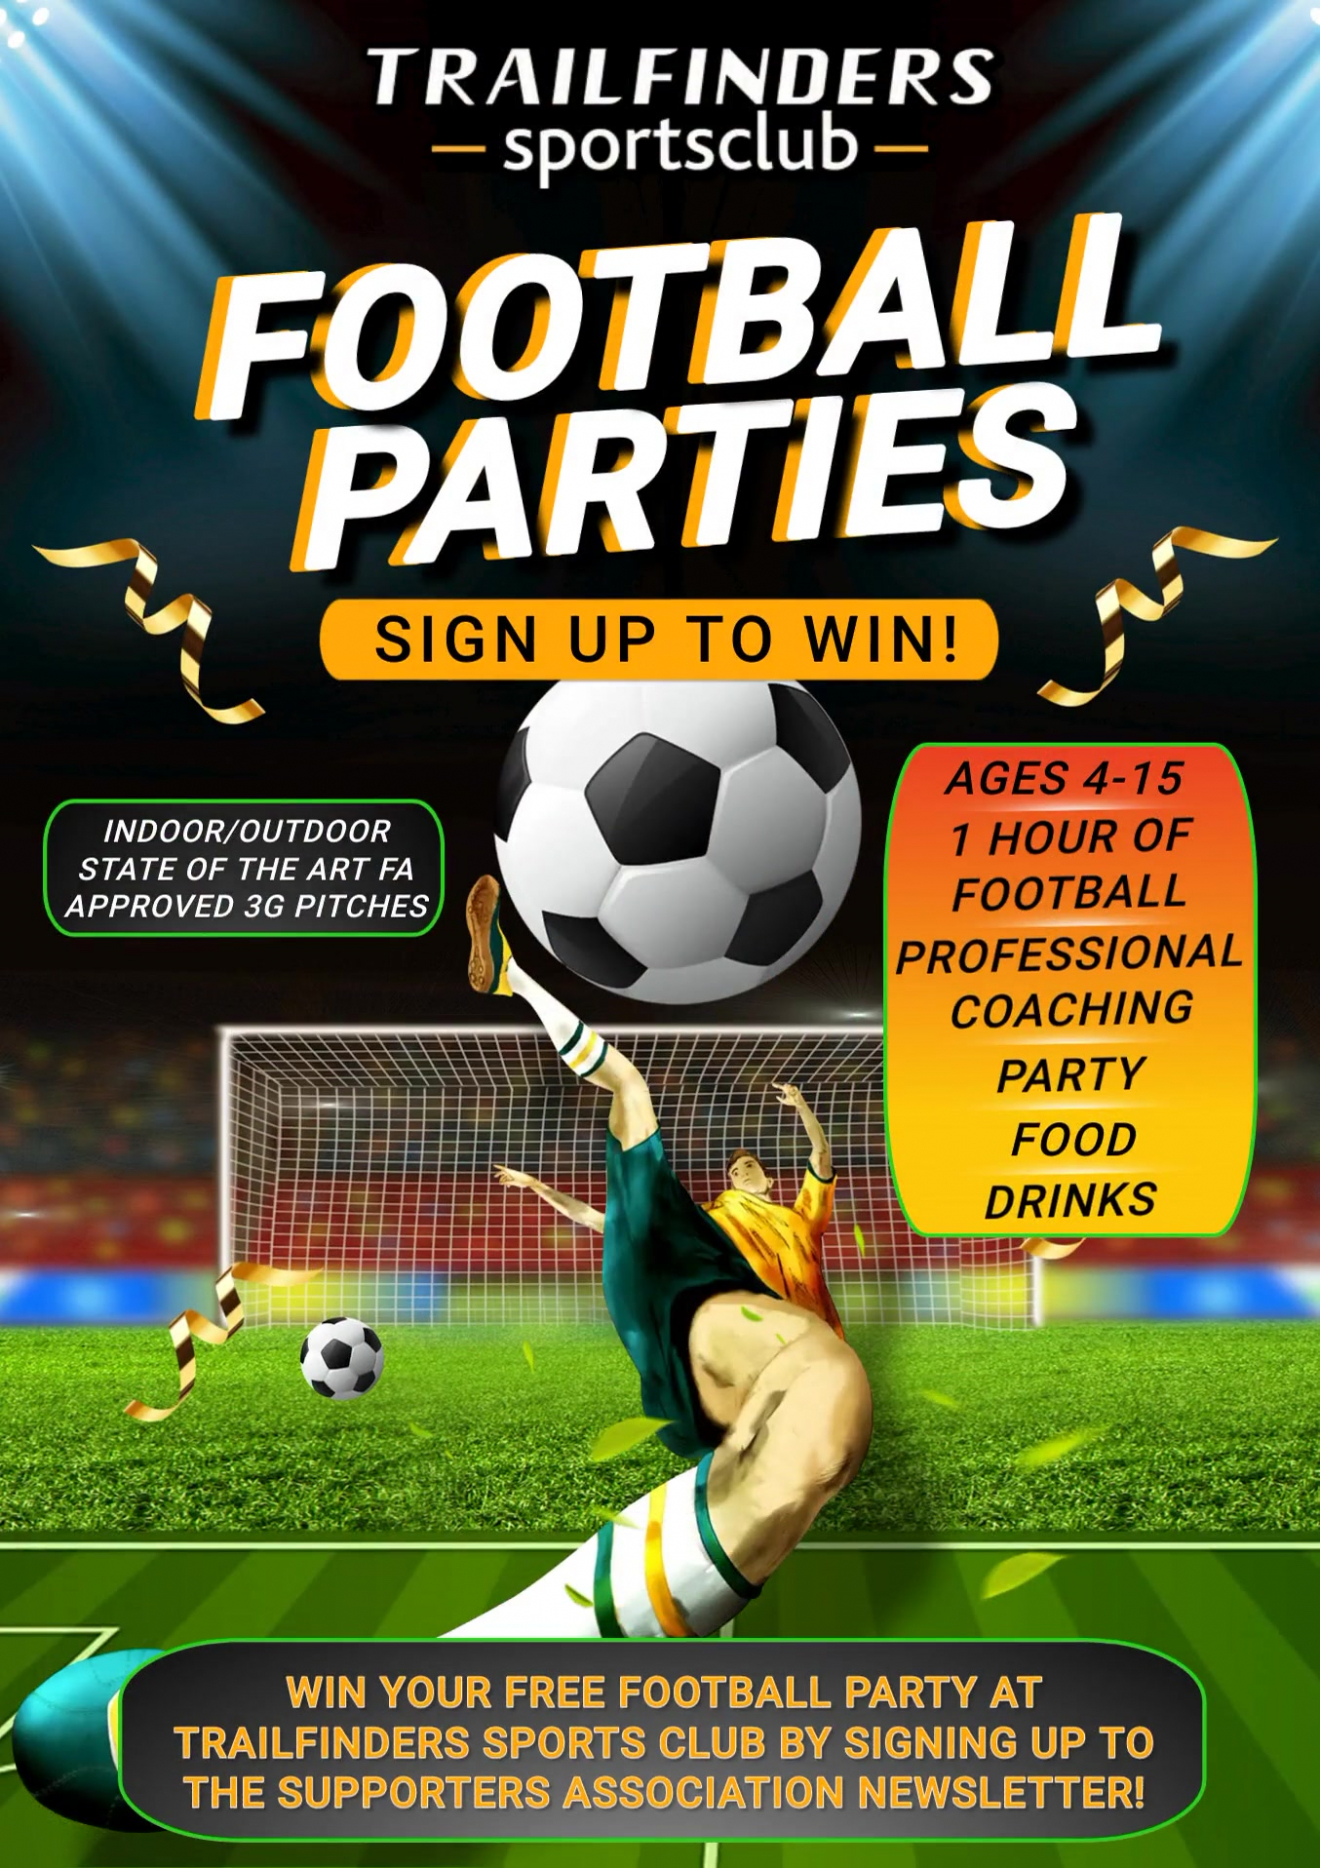 Last Chance to Win Big with our Football Party Giveaway